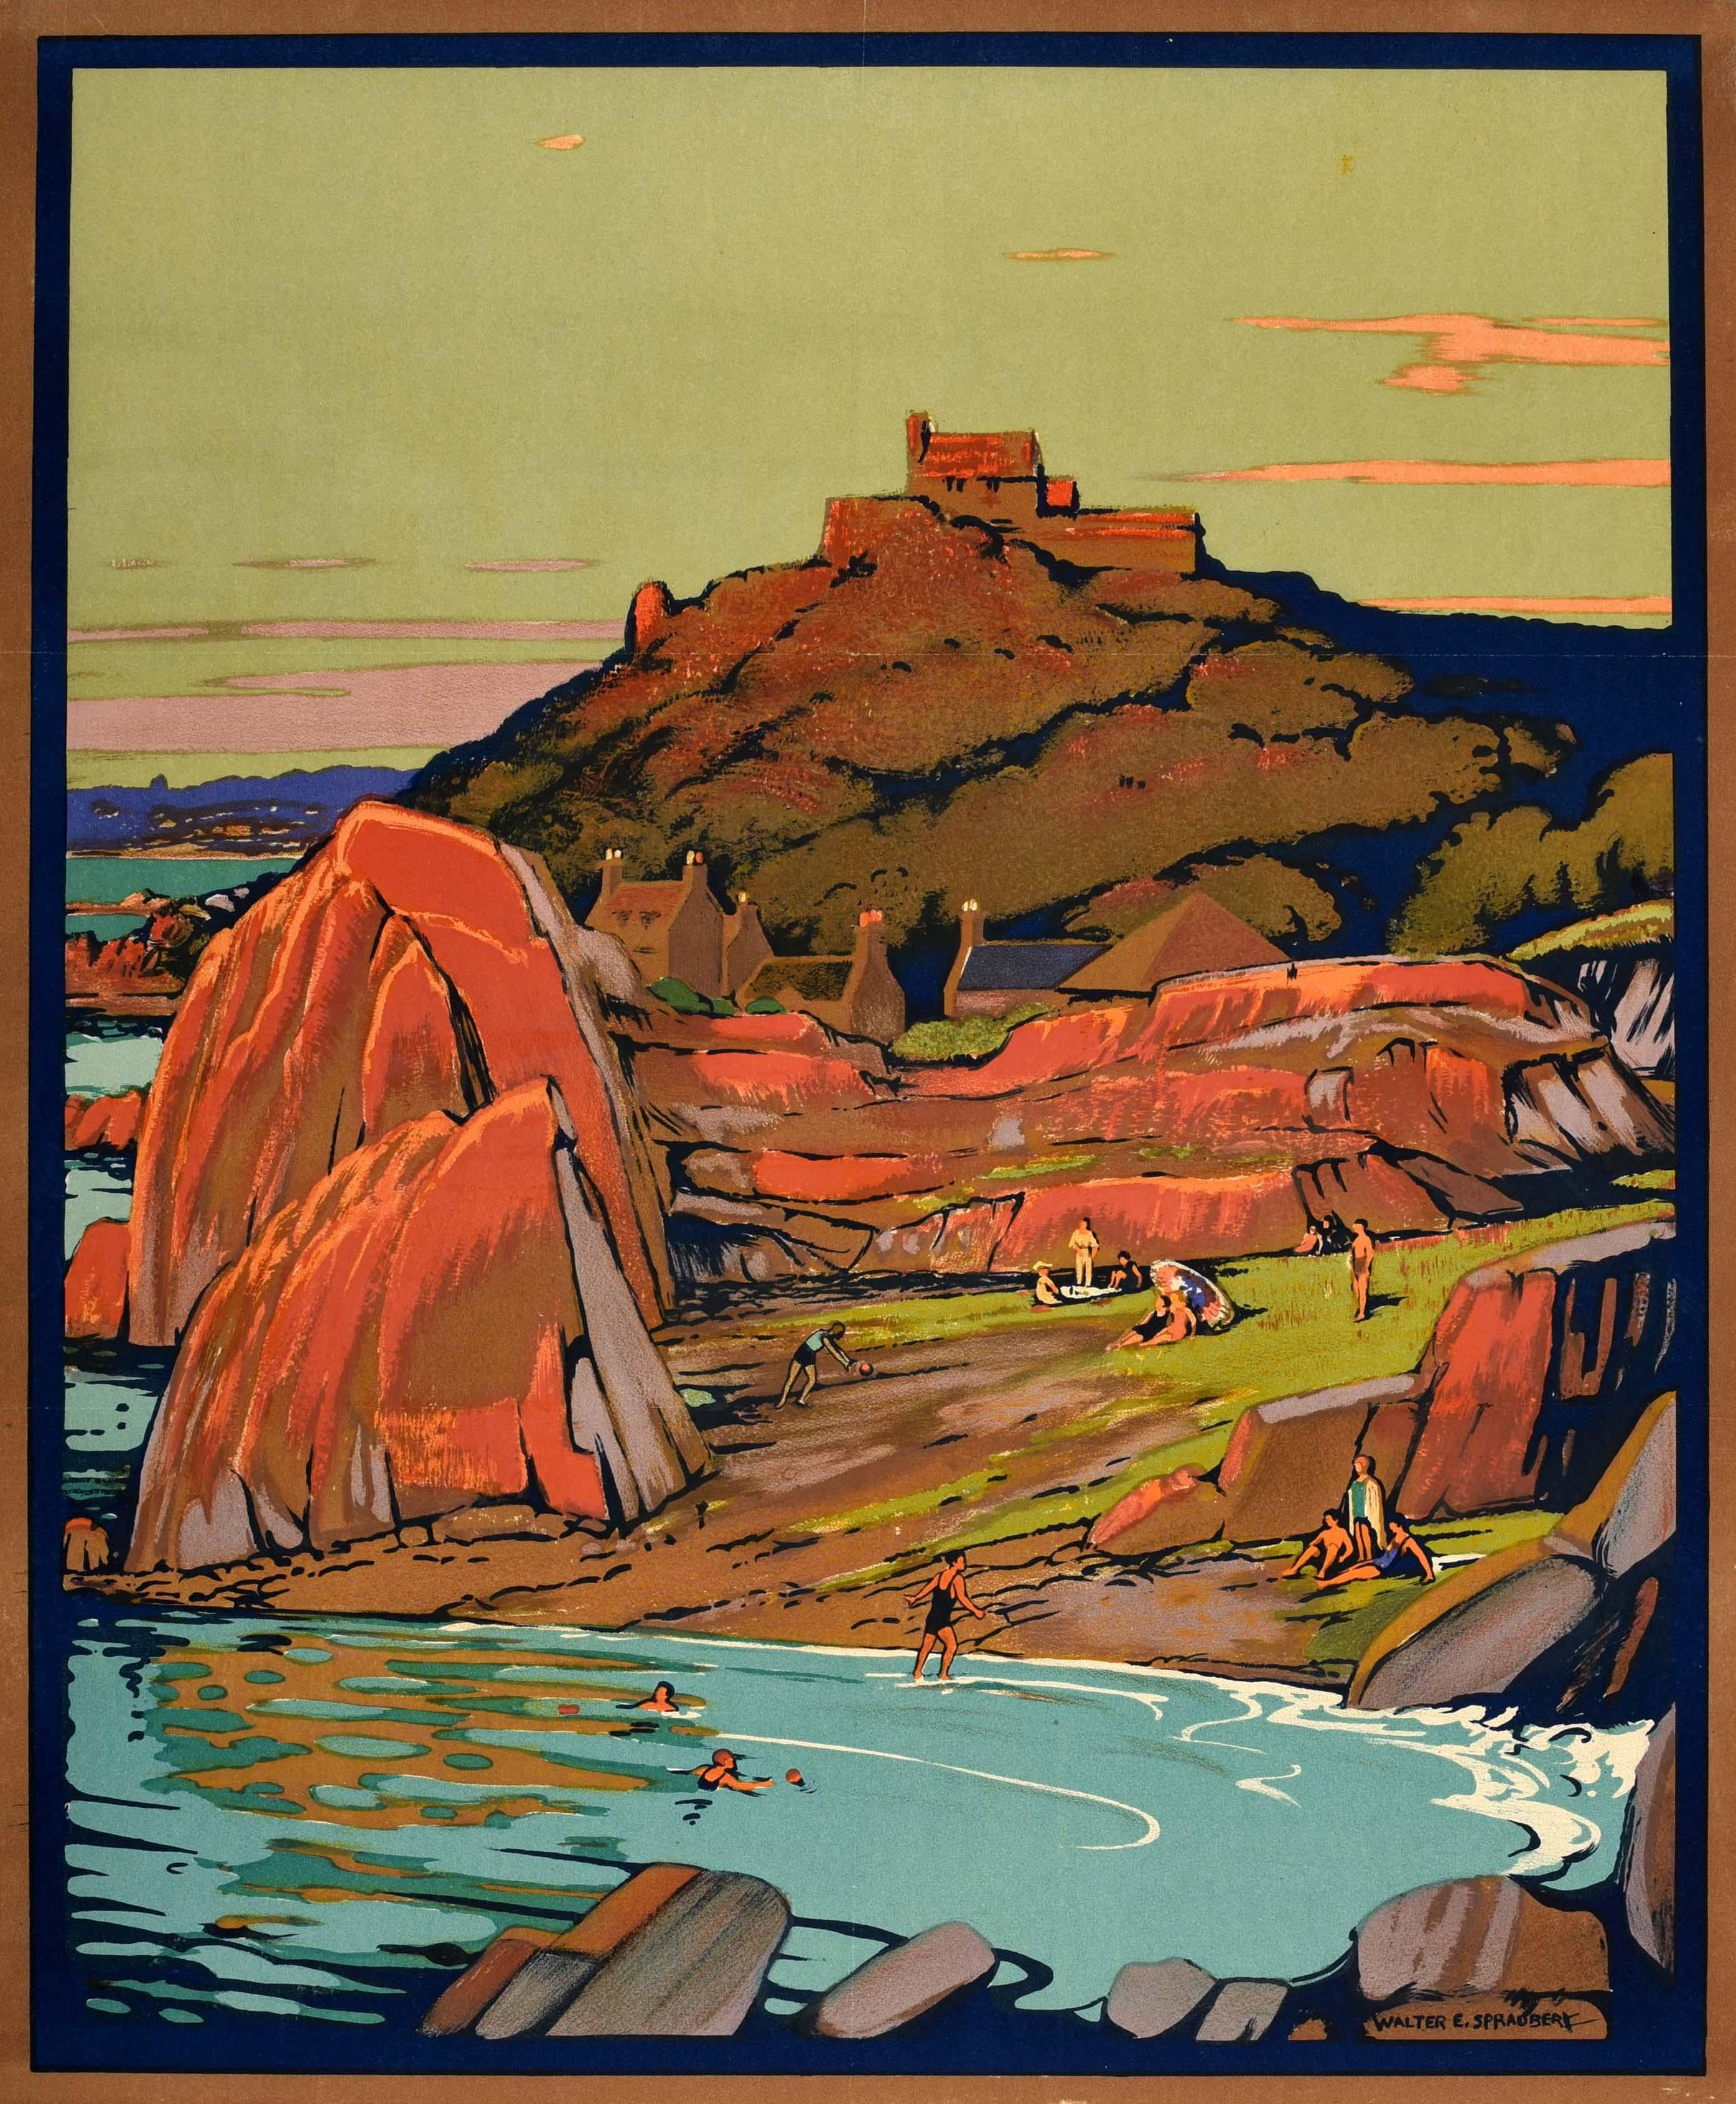 Original vintage train travel poster for Guernsey Sunshine Island featuring colourful artwork by Walter E. Spradbery (1889-1969) depicting a people enjoying a day relaxing and sunbathing on grass between rocks in a bay and swimming in the sea with